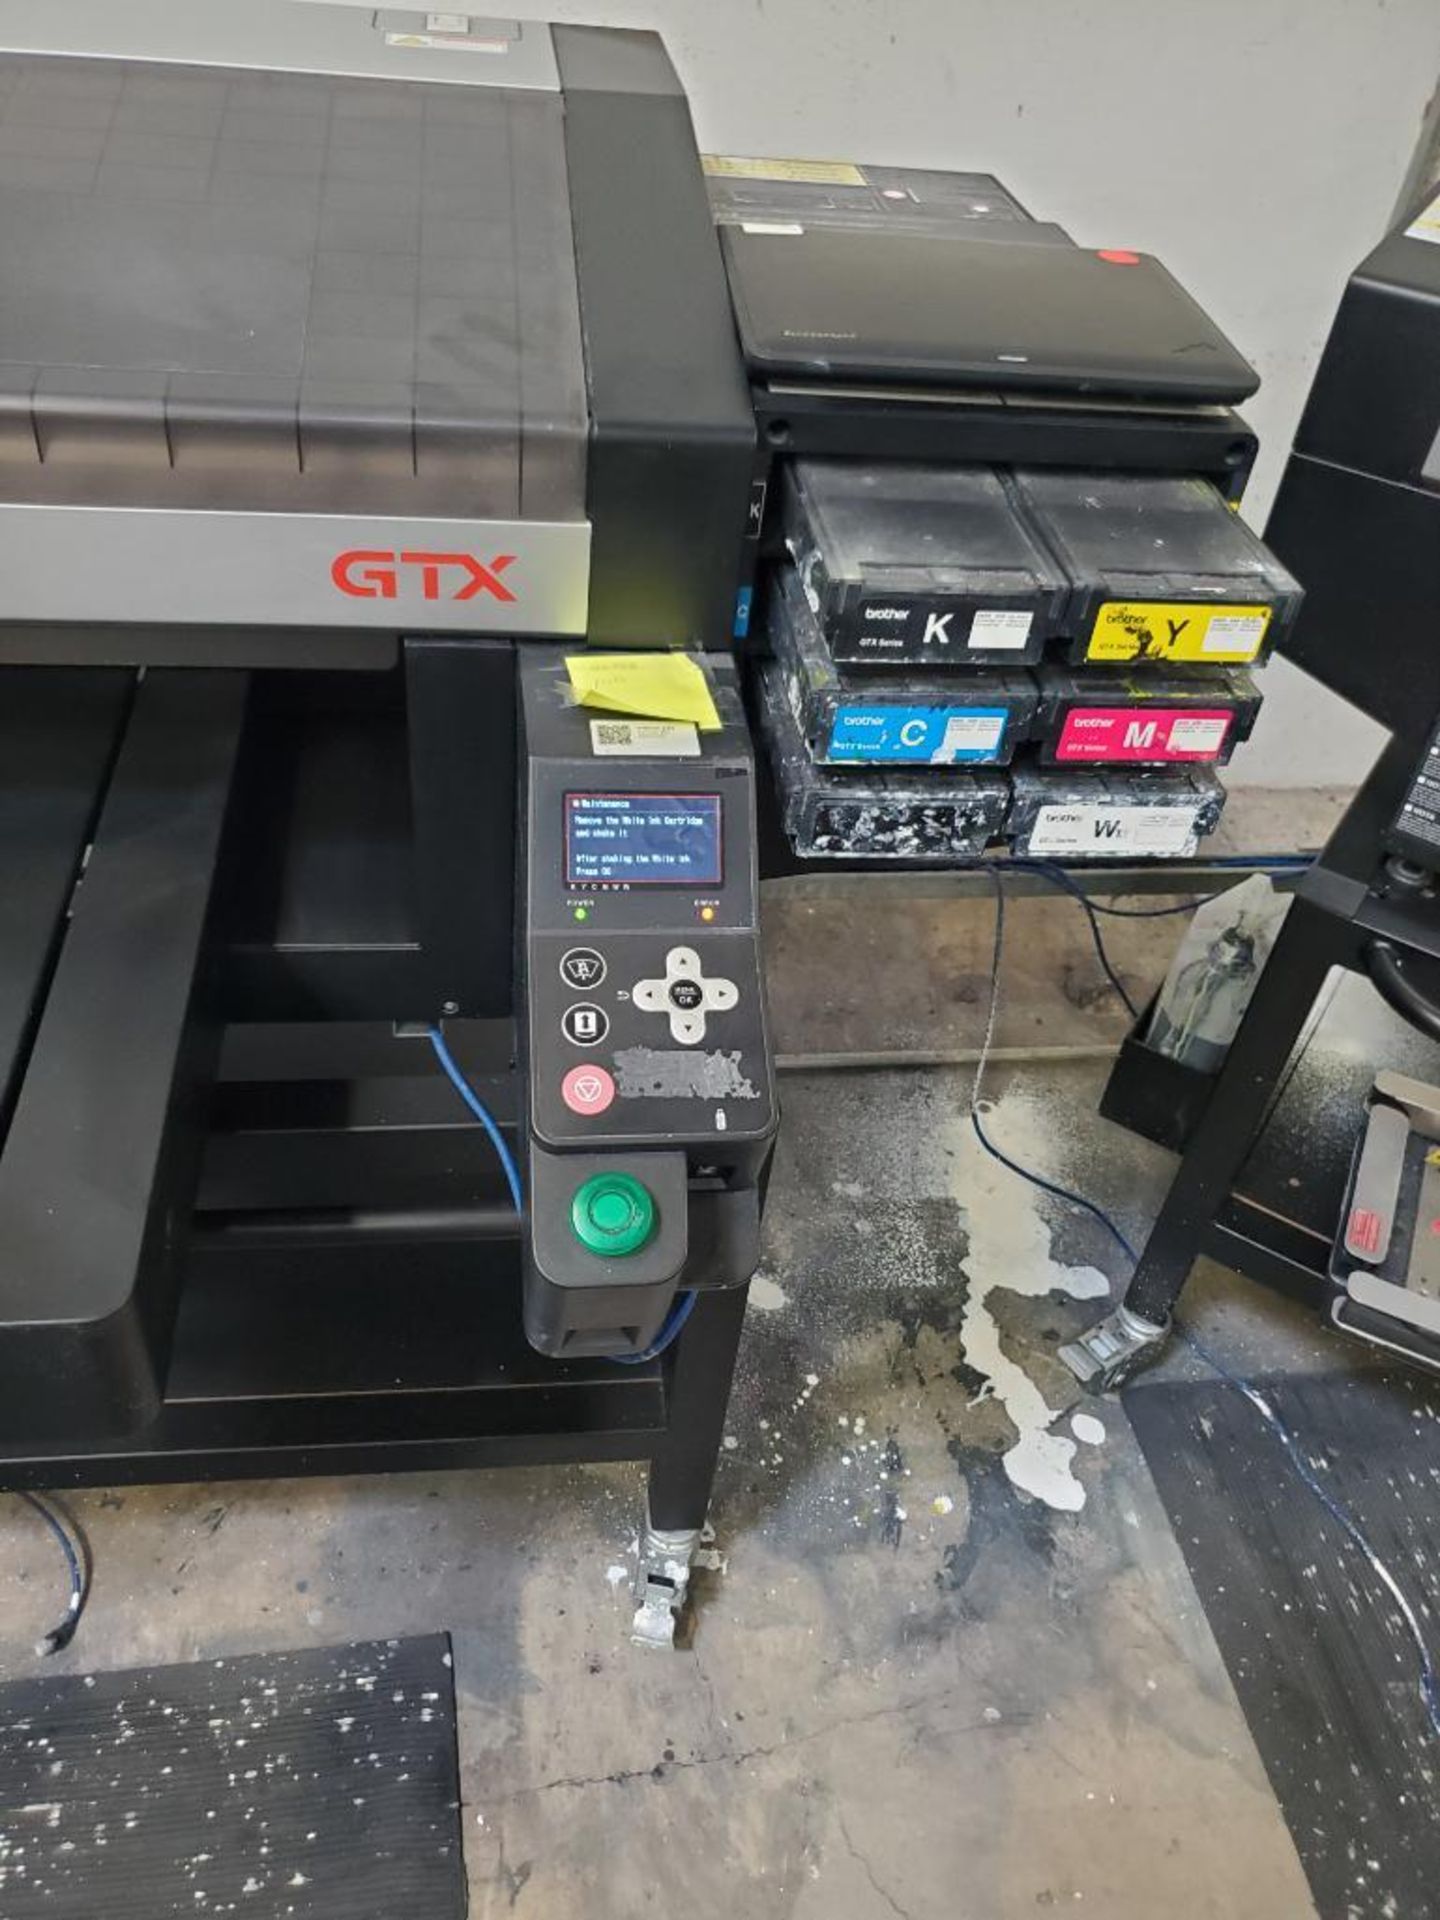 BROTHER GTX 422 DIRECT TO GARMENT PRINTER; WITH LENOVO THINKPAD, 44,995 PRINTS, S/N H9931975 - Image 2 of 2